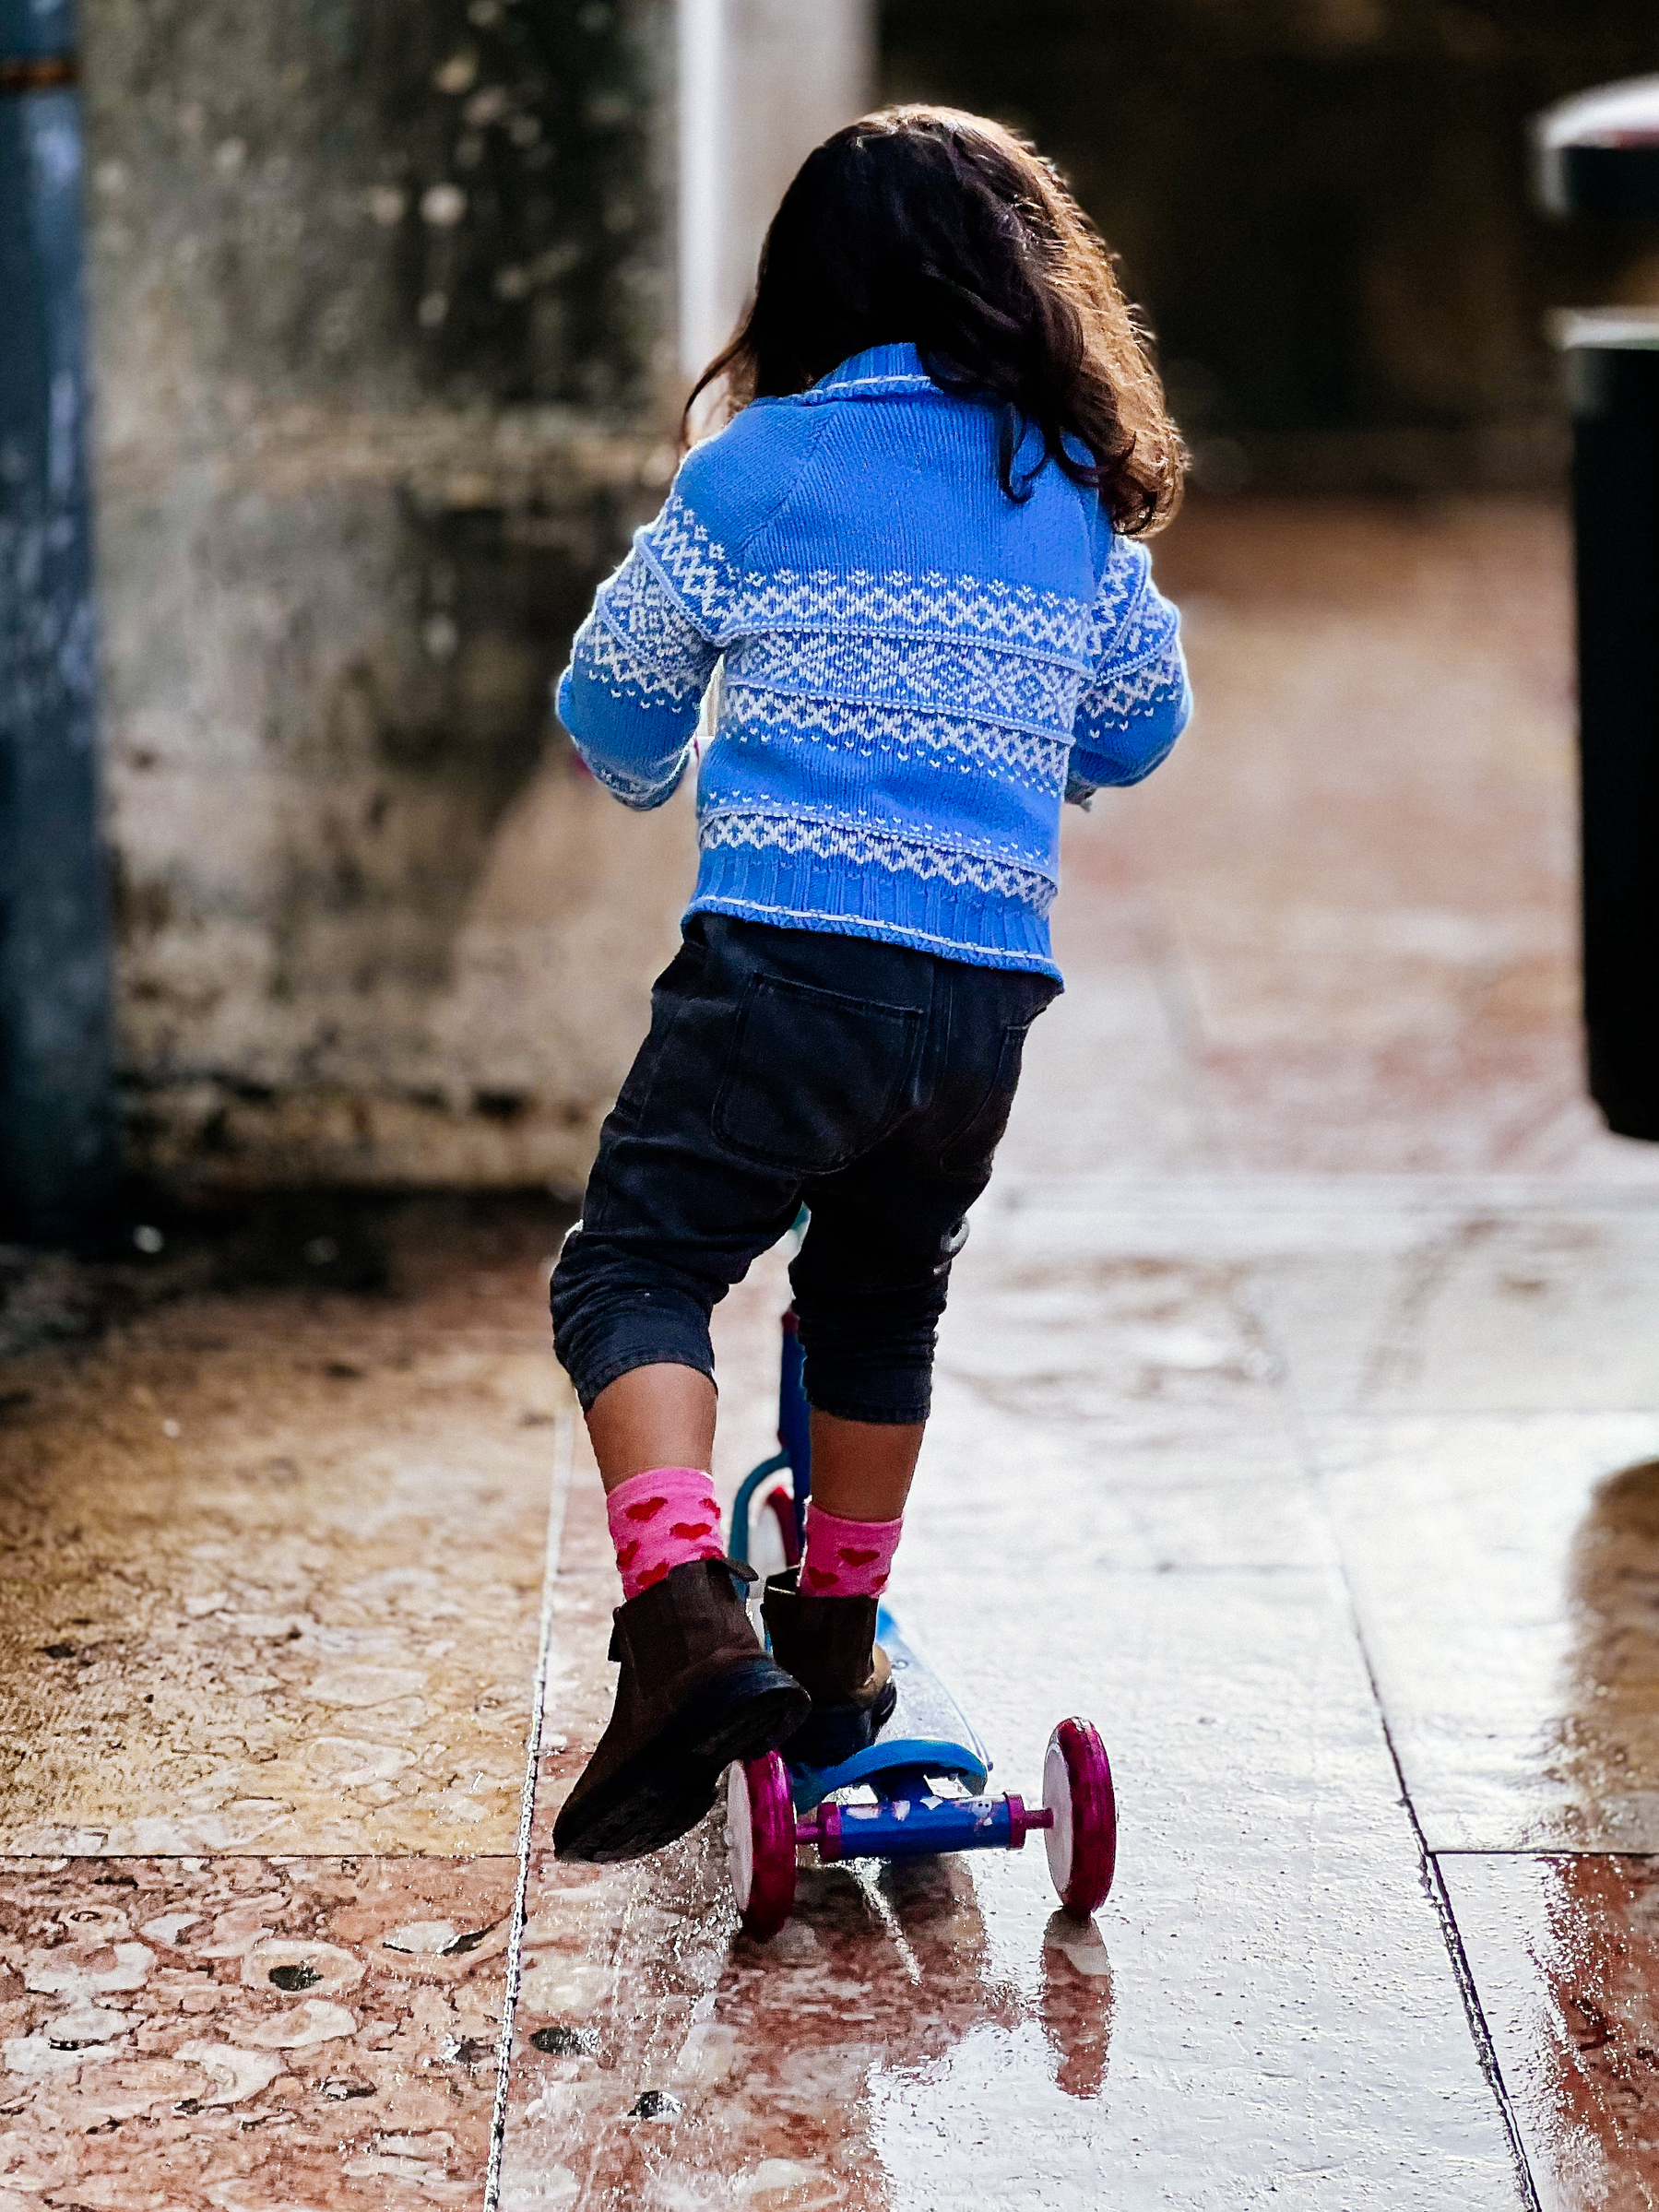 A girl riding a scooter.